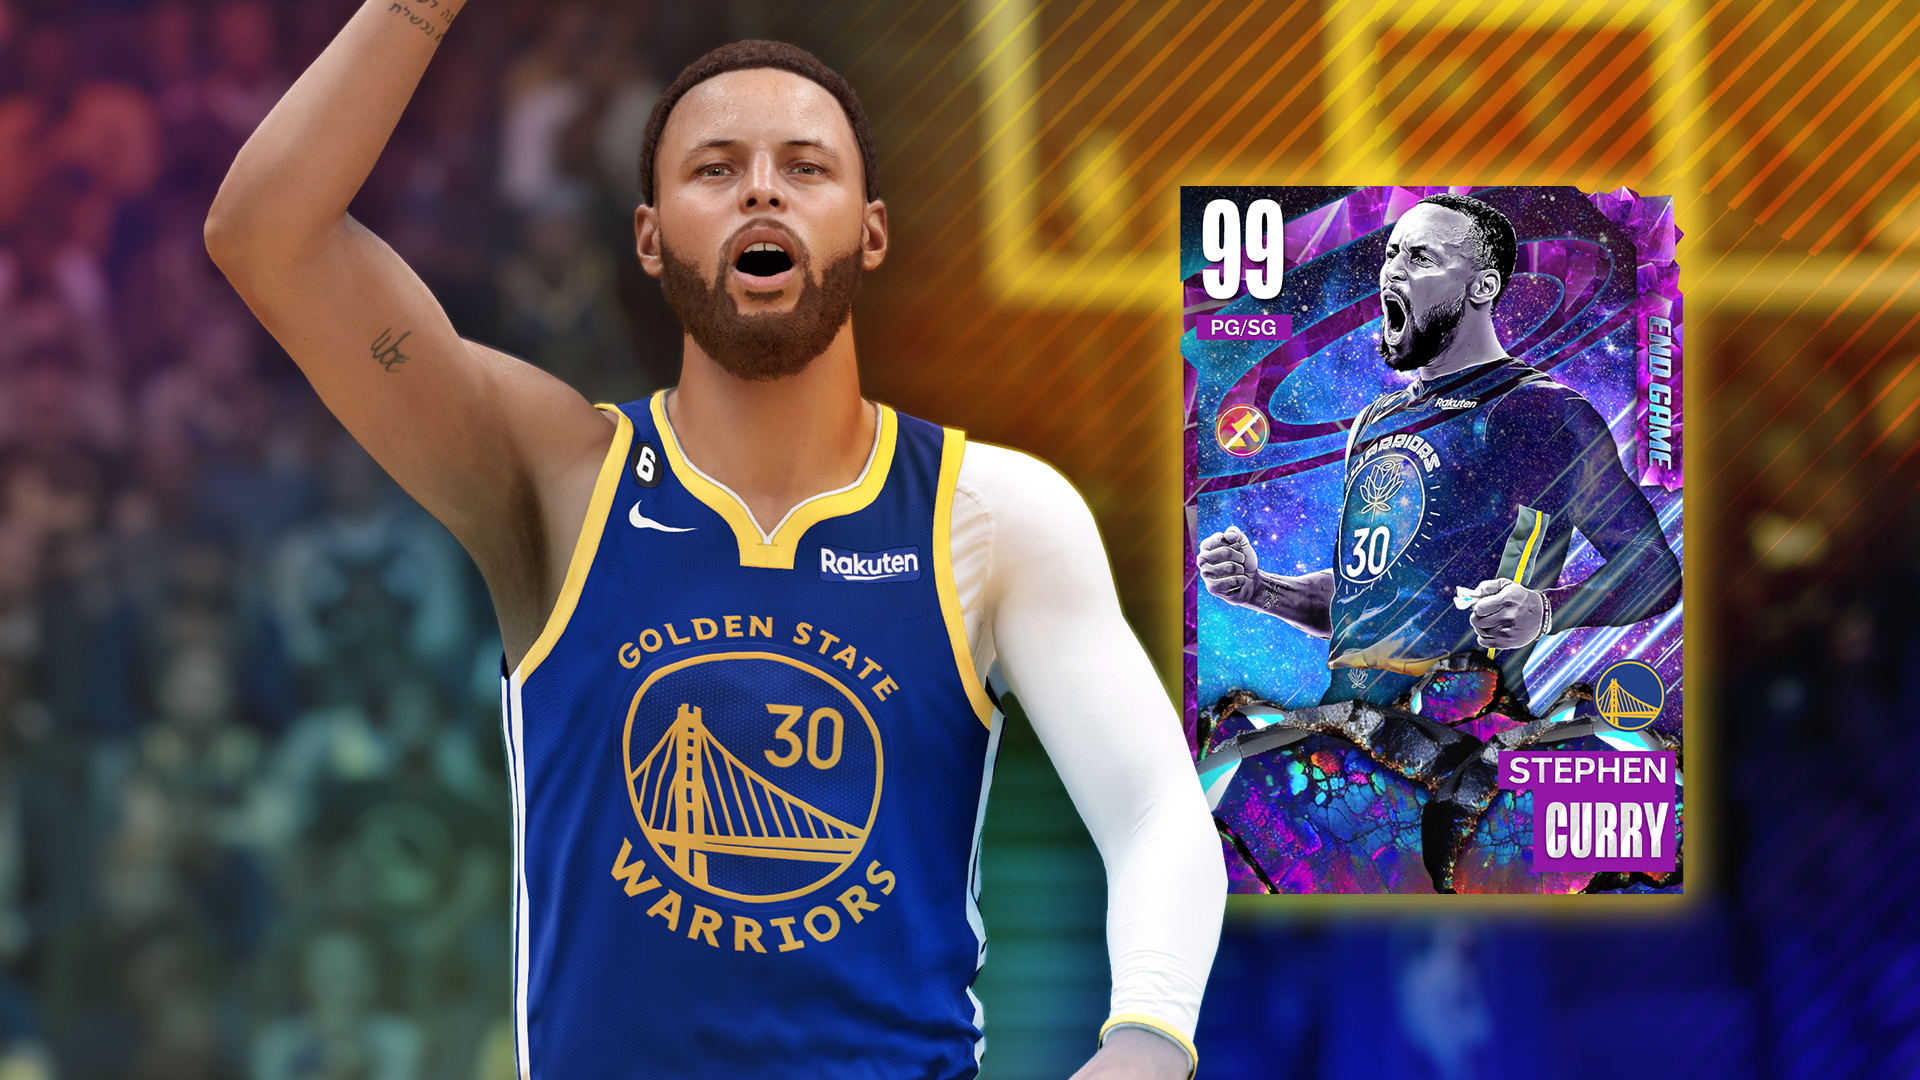 NBA23-S6-COURTSIDE REPORT-STEPH CURRY-1920X1080